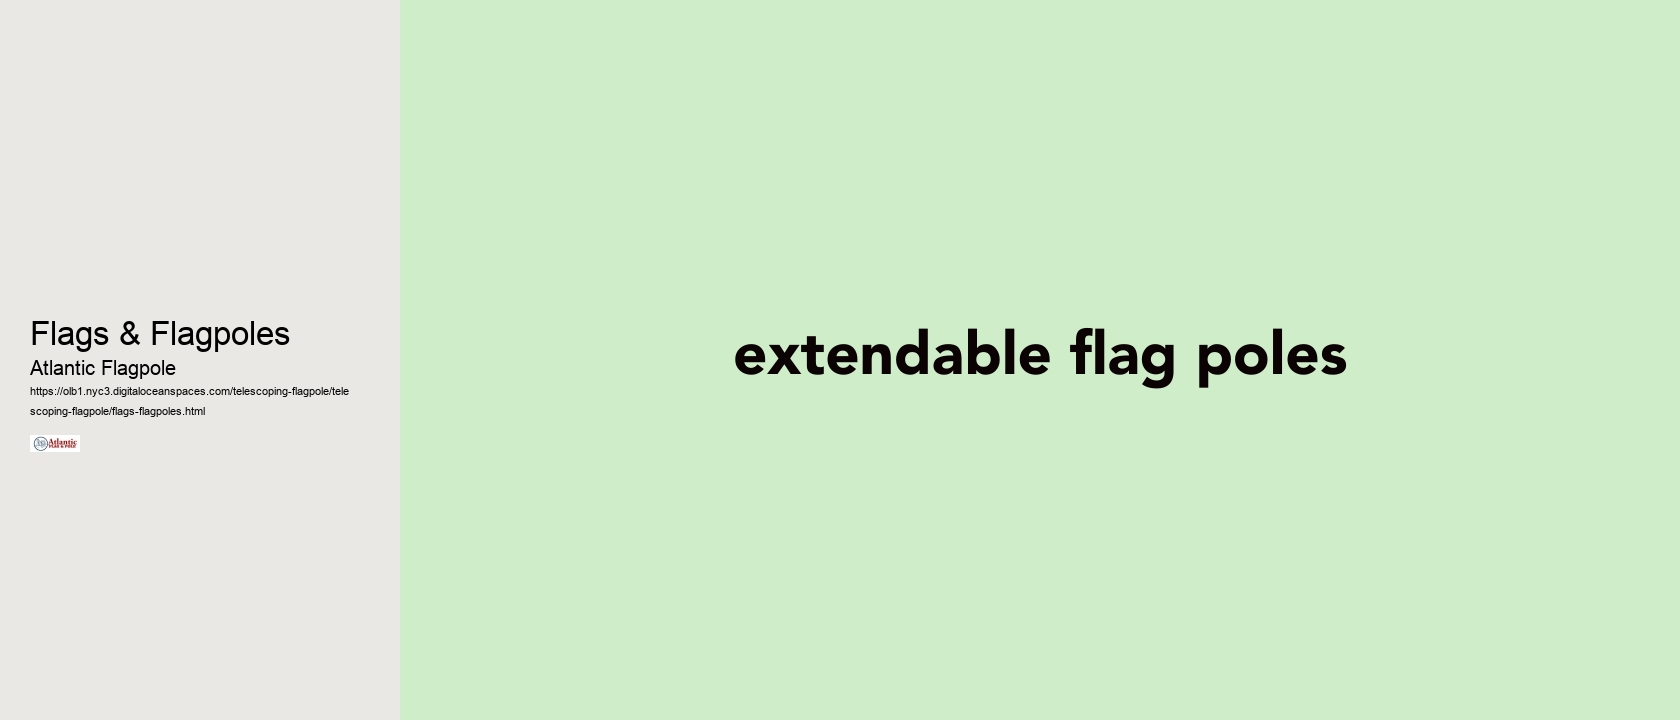 Flags & Flagpoles